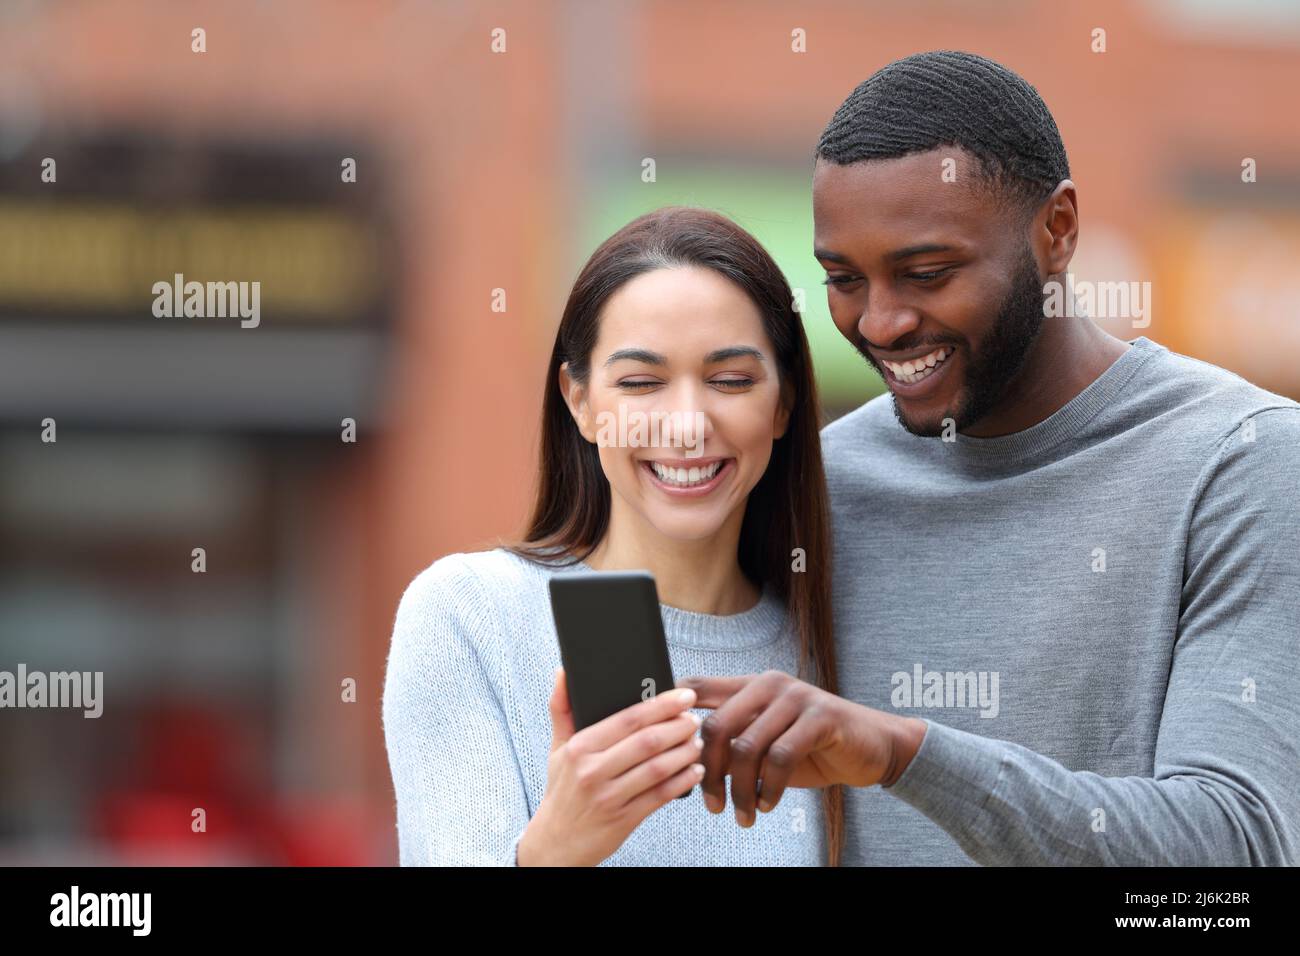 Front view portrait of a happy interracial couple consulting phone text in the street Stock Photo